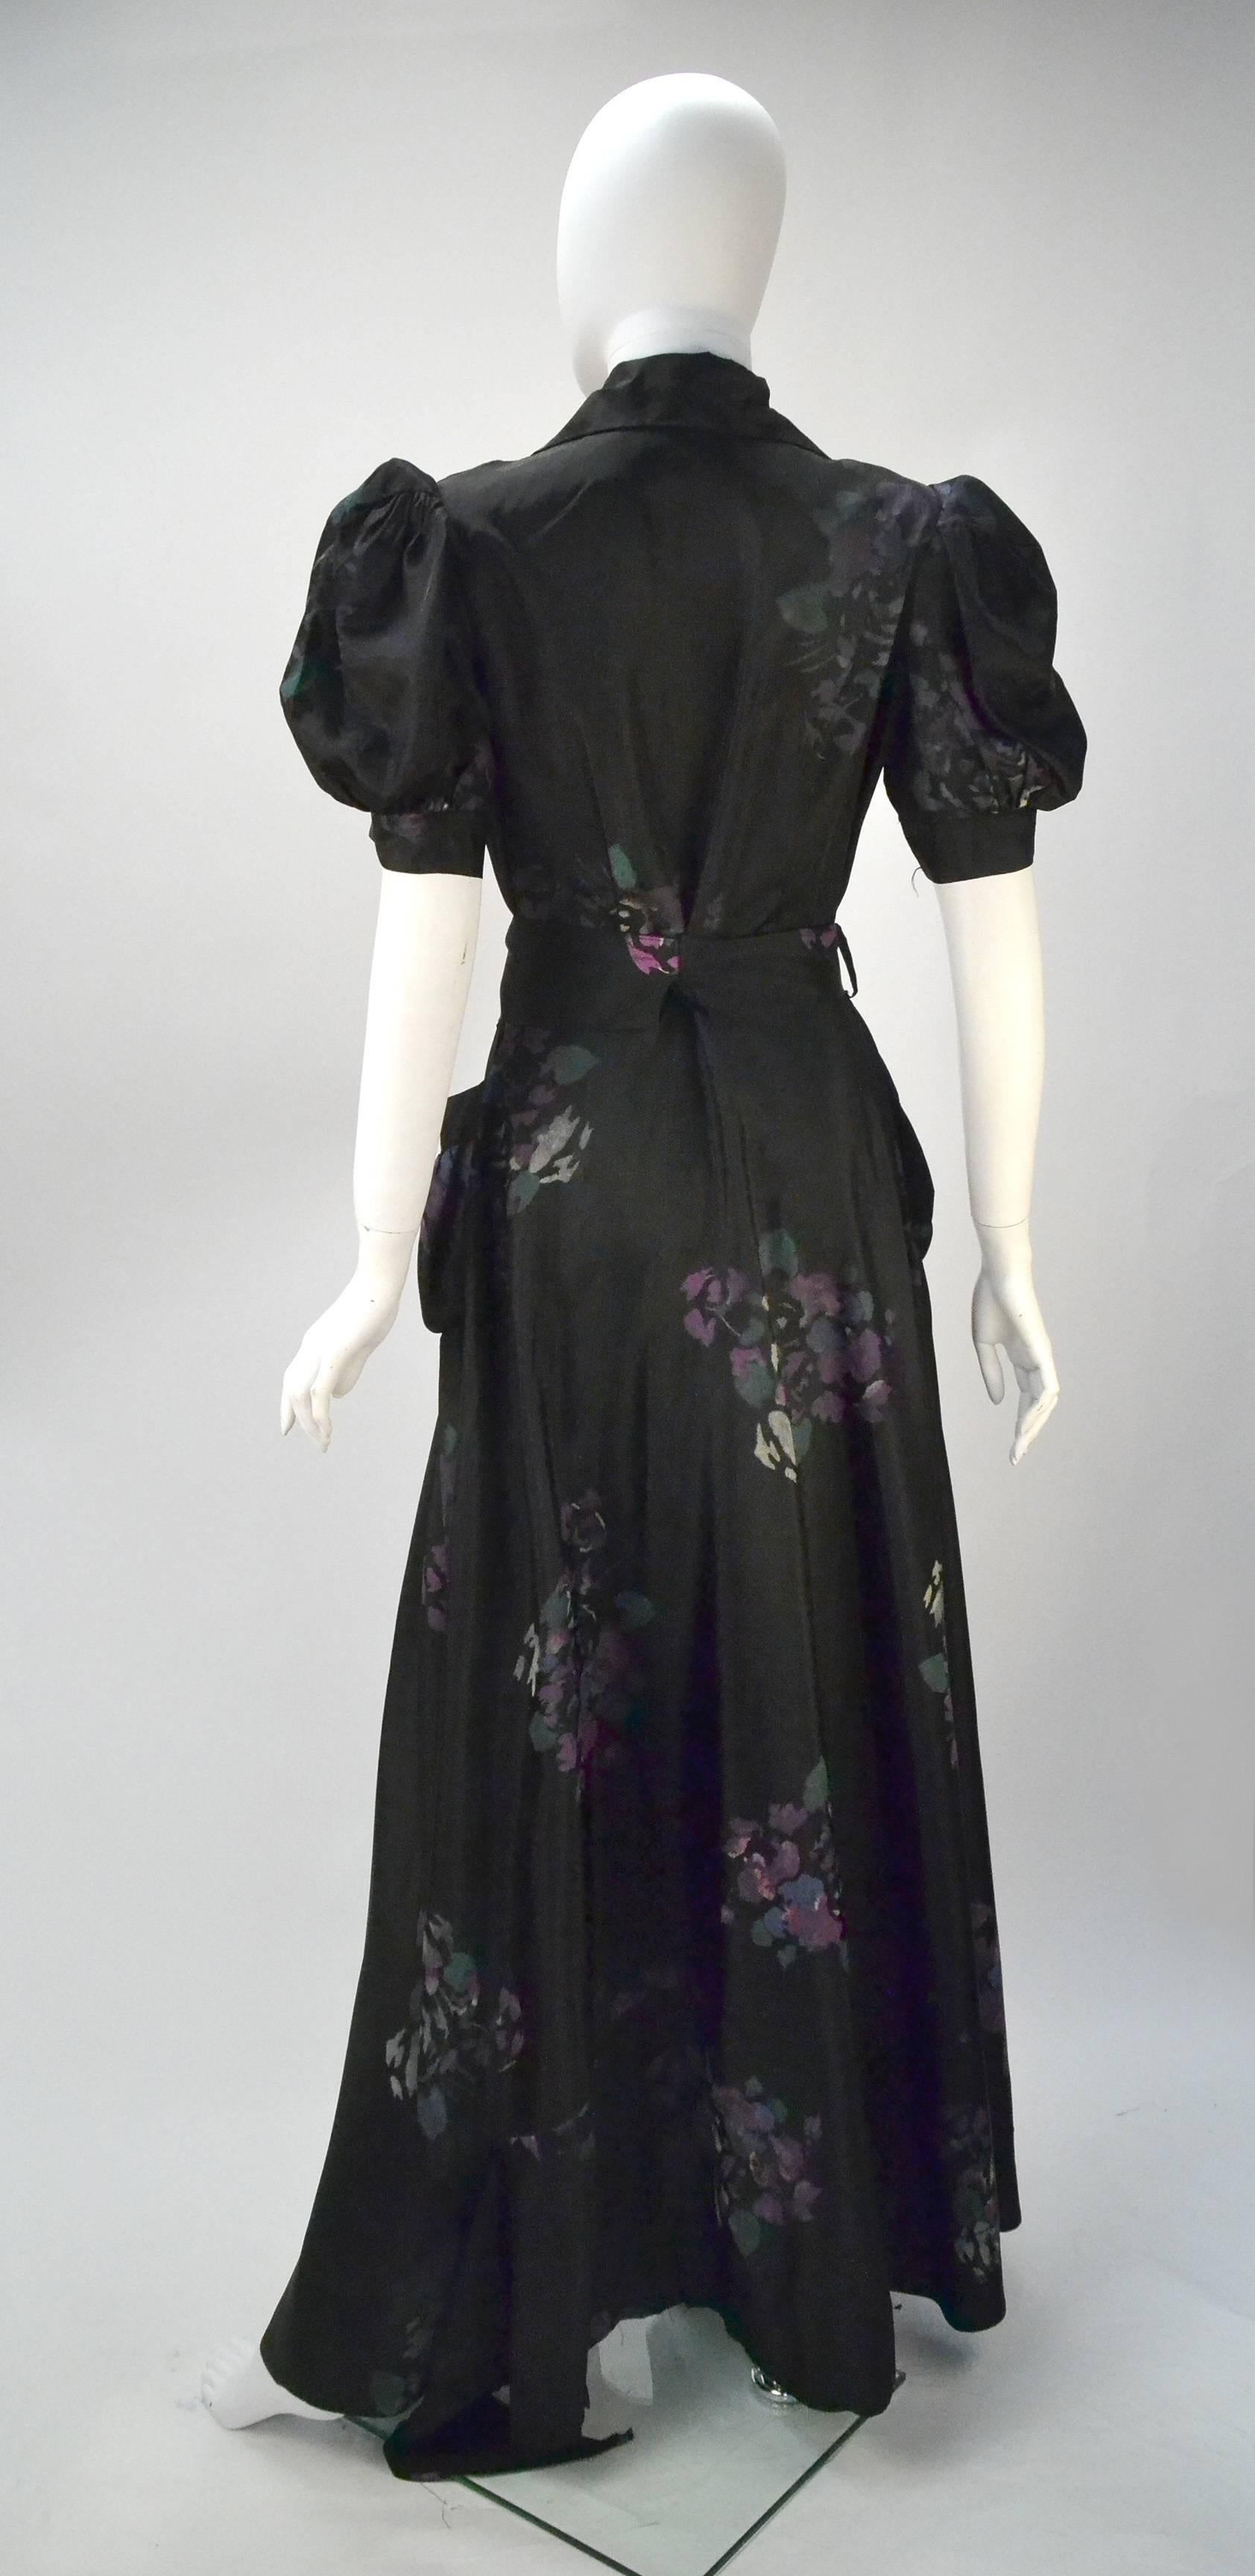 Beautiful 1940's Royal Maid Loungewear black dress with hand painted purple floral bouquets. The dress features puff sleeves, patch pockets and a winged collar. The dress has a front zippered closure. There is a detachable fabric belt for fastening